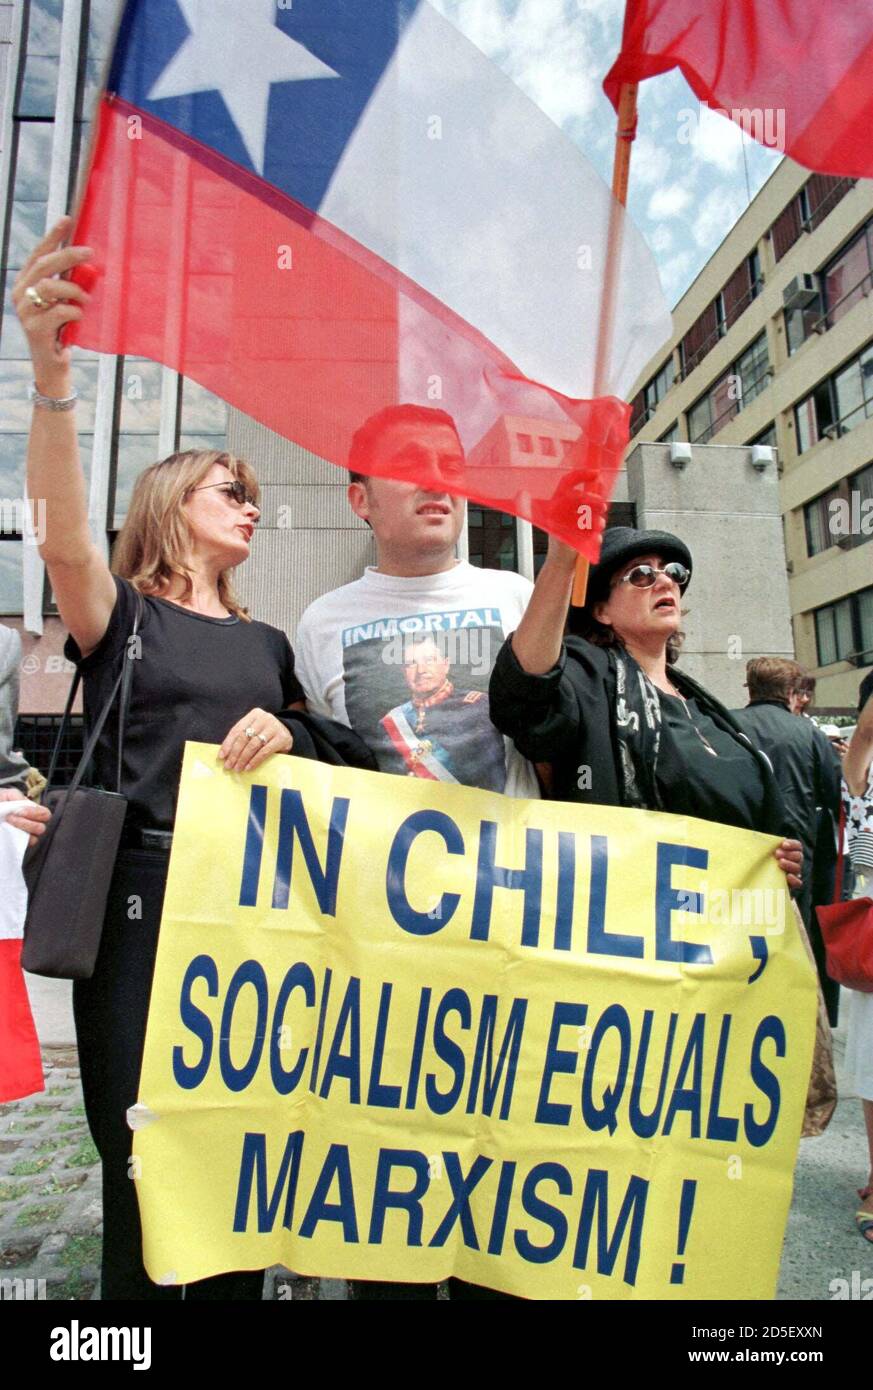 Supporters of former Chilean dictator Augusto Pinochet protest outside the  British embassy in Santiago, March 26. Britain's Law Lords decided March 24  by a 6-1 majority that Pinochet, who led the Chile